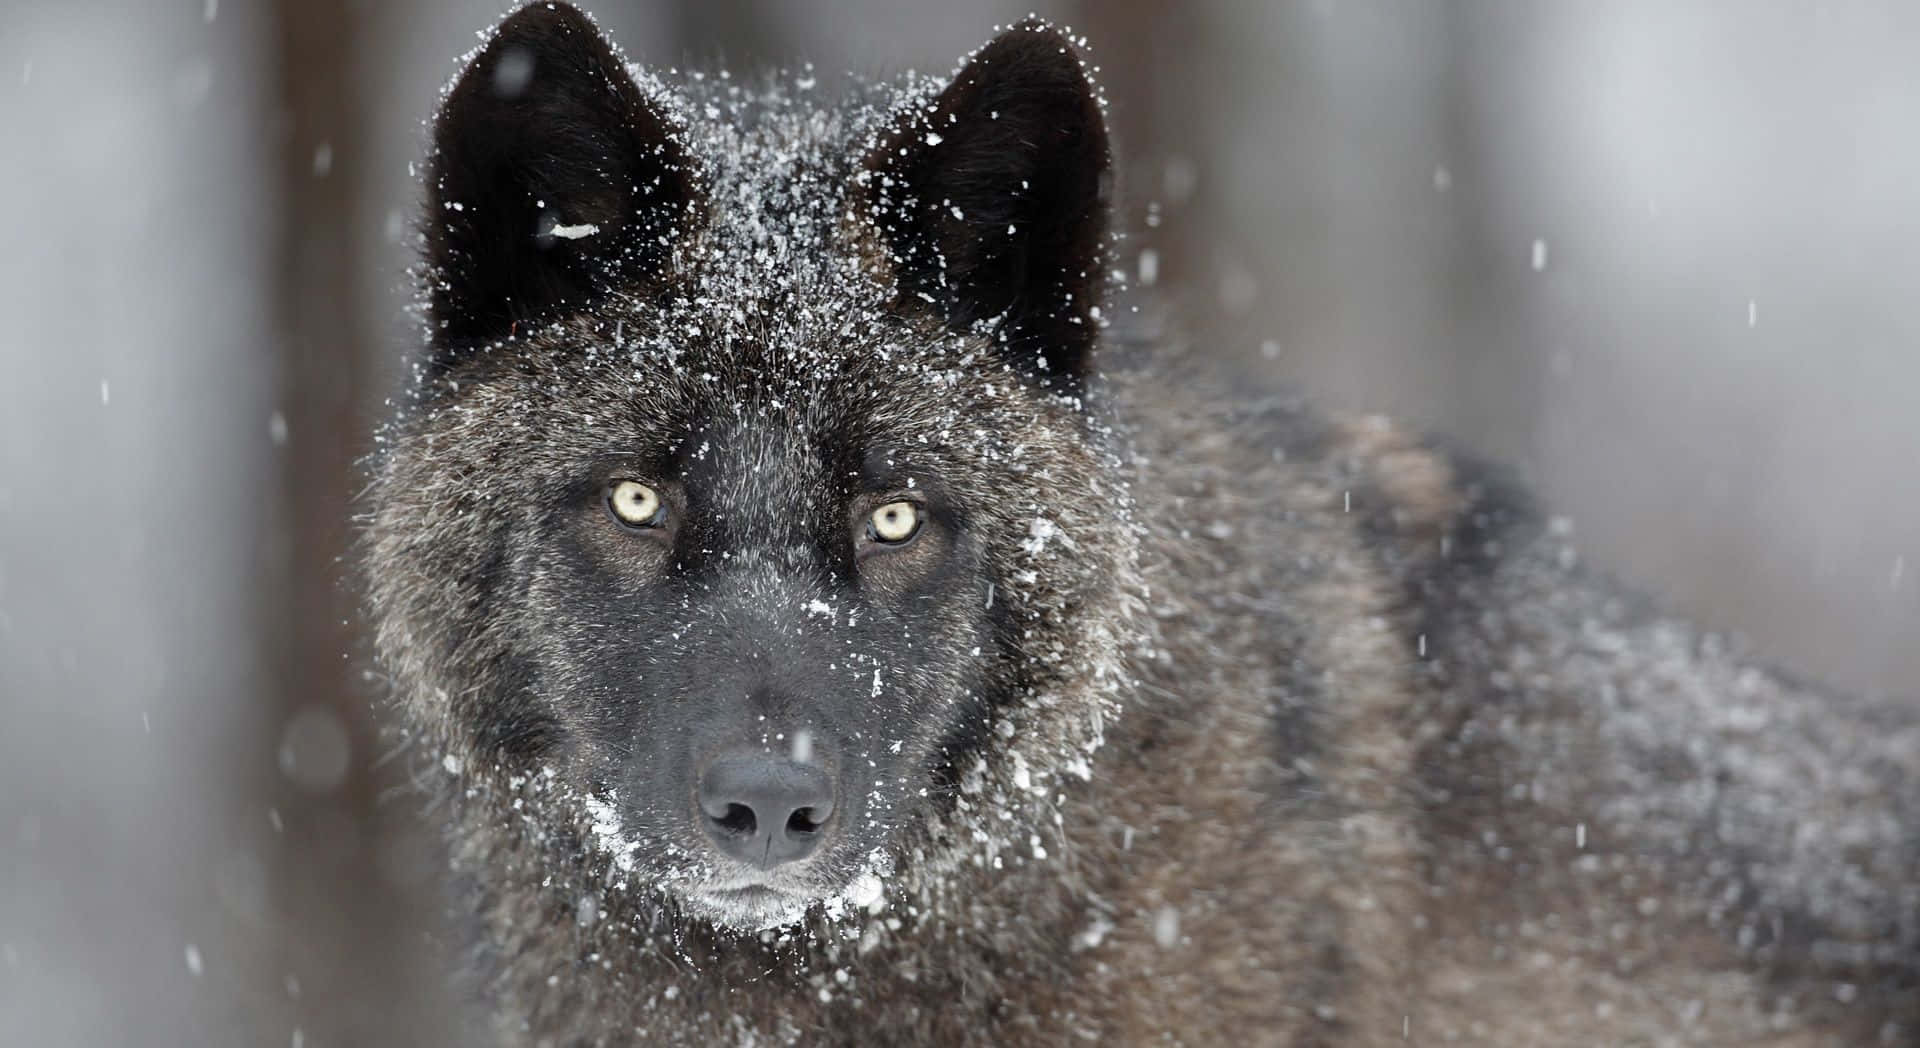 An intense image of a black wolf standing in the wilderness